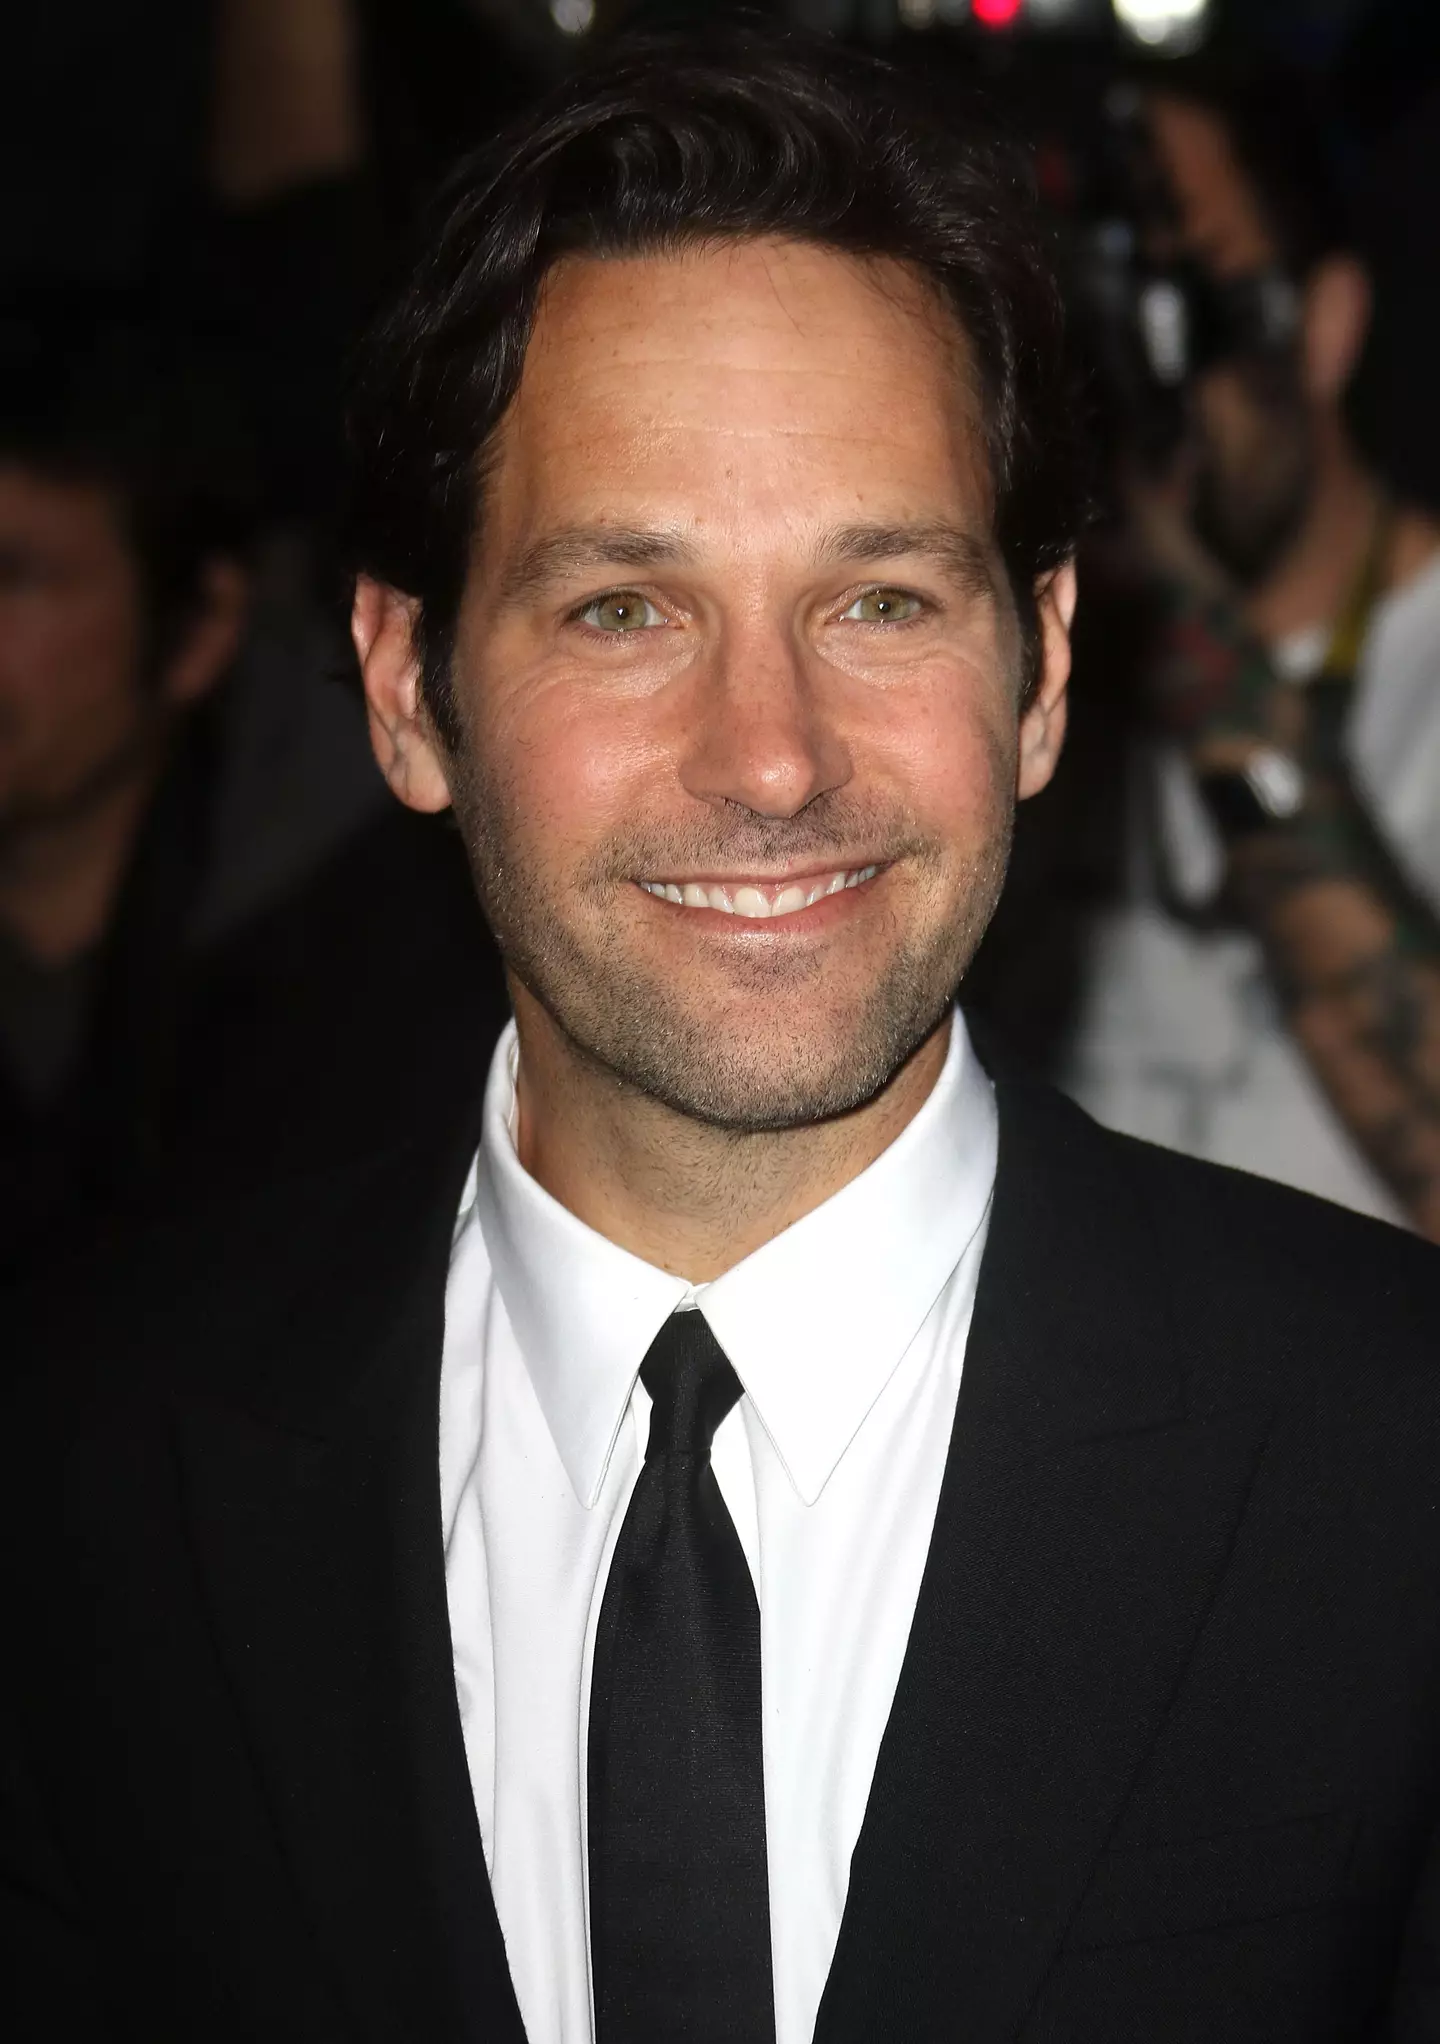 Paul Rudd has been asked to adopt an animal that supposedly looks exactly like him.